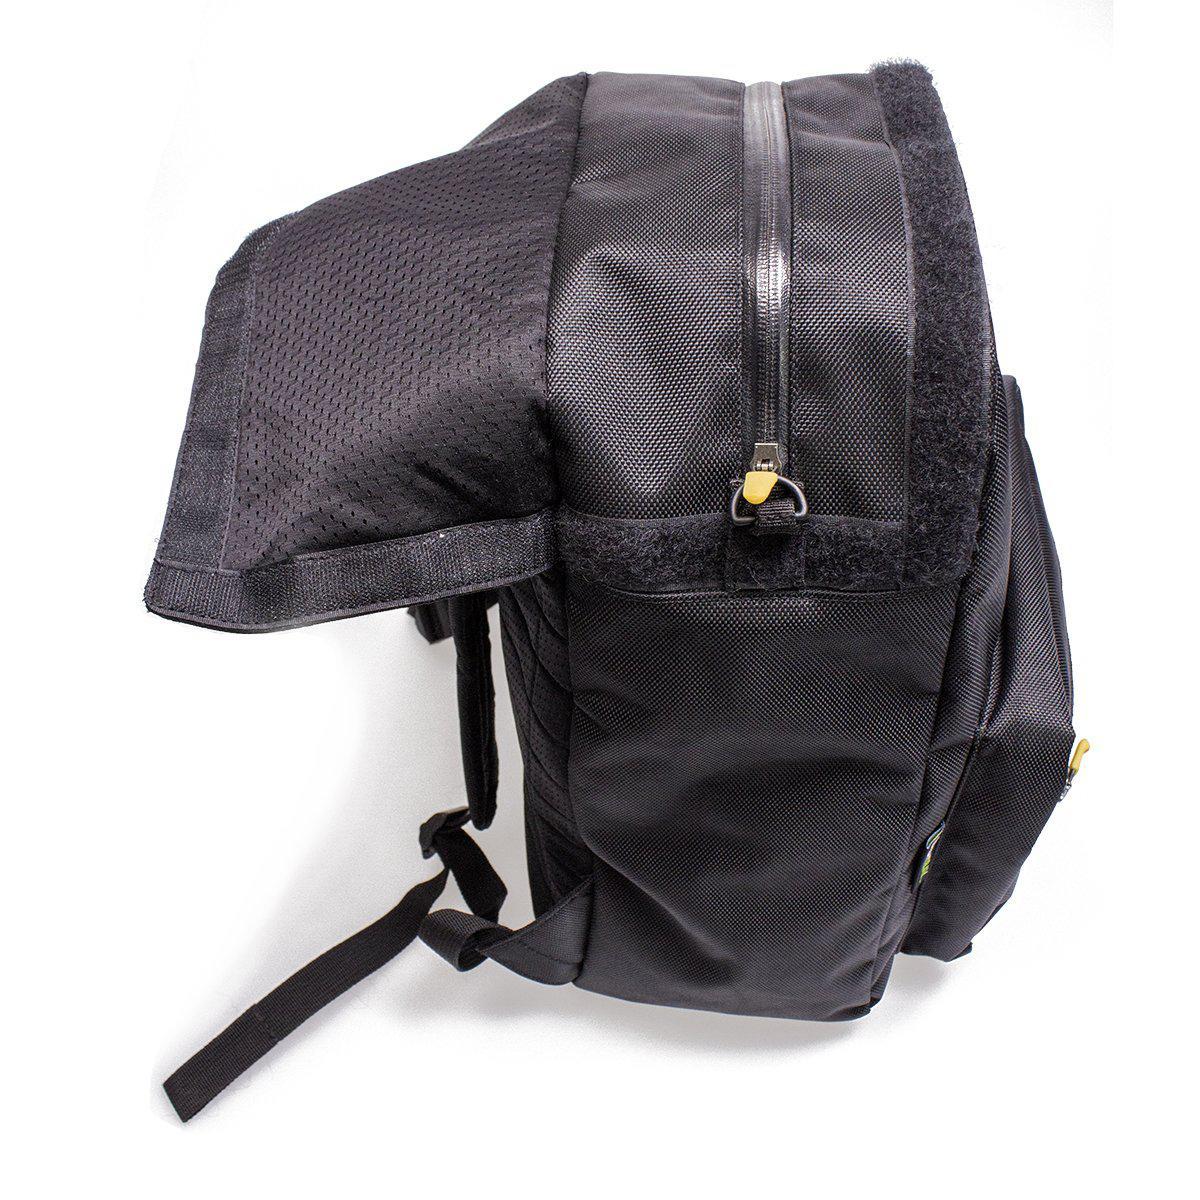 Carbon Transport Backpack Accessories